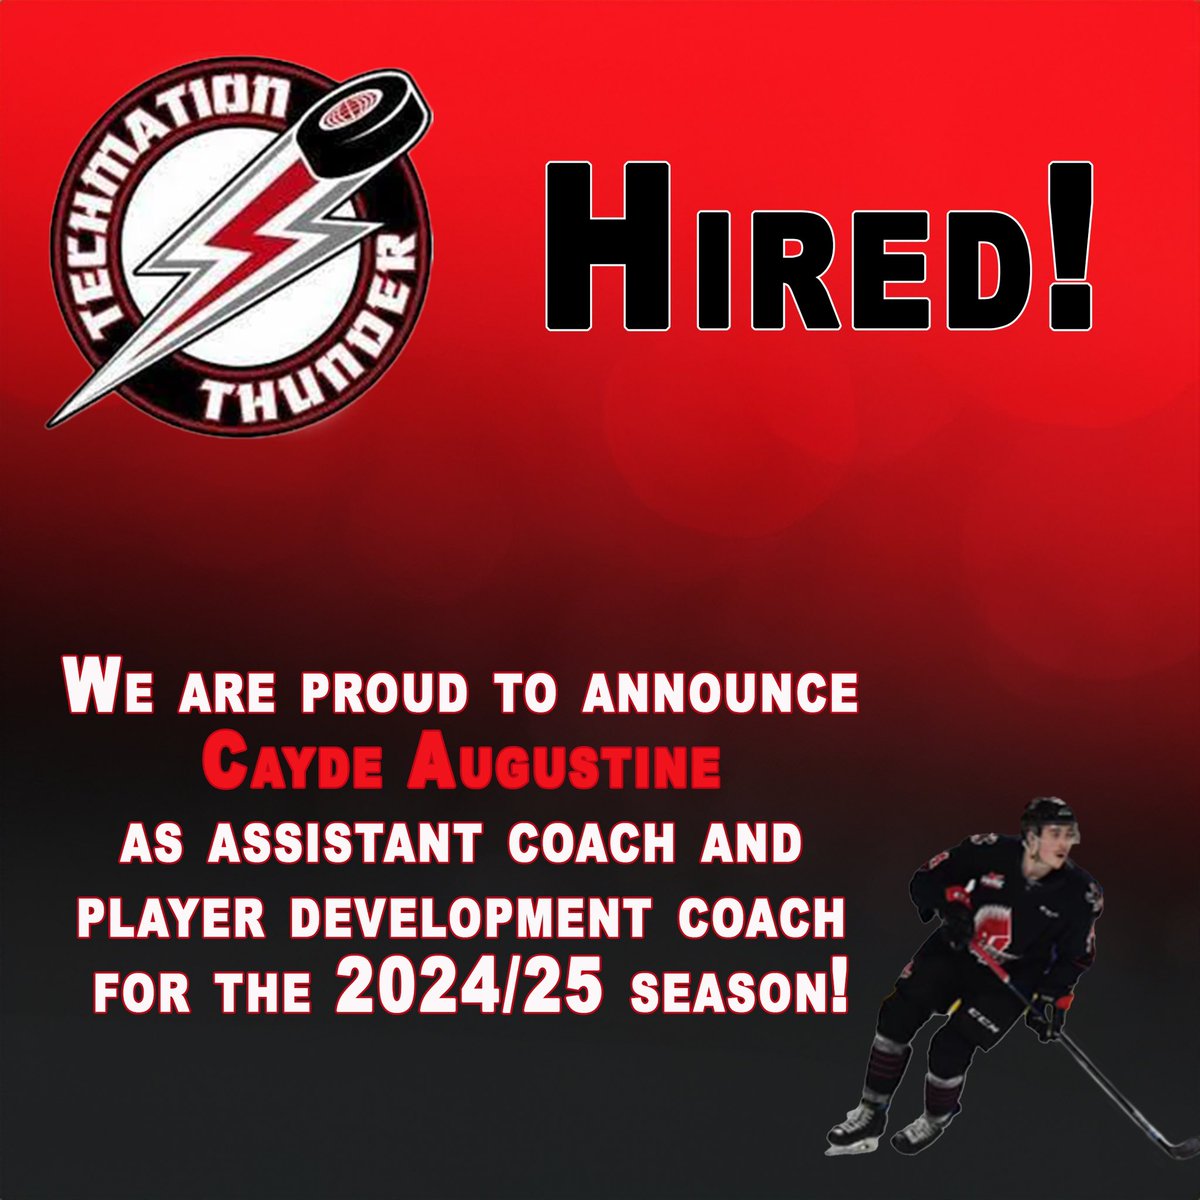 Airdrie Techmation Thunder Announcement: The Airdrie Techmation Thunder are excited to announce that Cayde Augustine will be behind the bench for the 2024\25 season as AC and will also act as Player development coach! Welcome to the Family Cayde, we are super happy to have you.